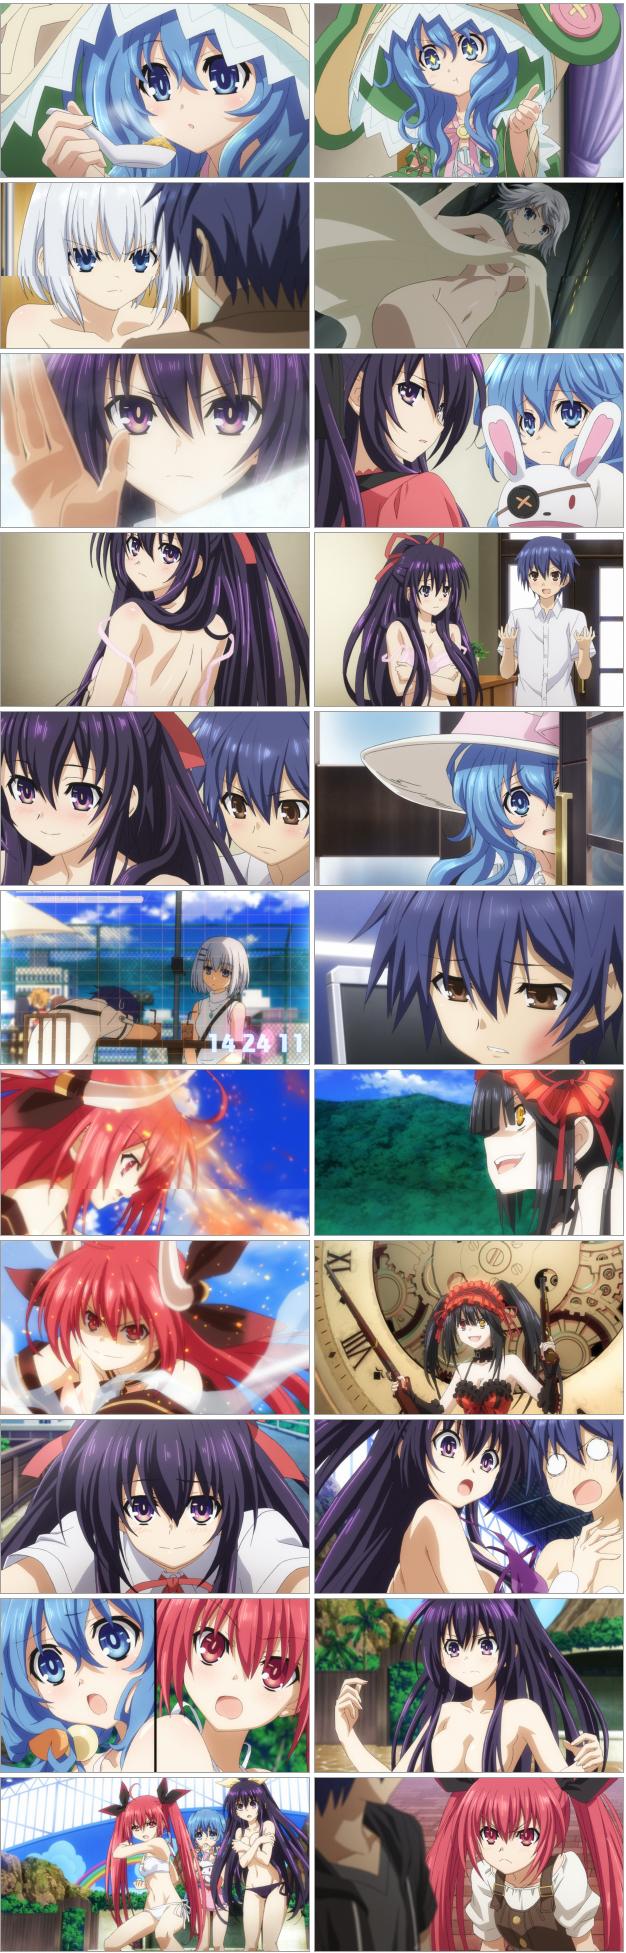 Date A Live -Director's Cut Edition- (Extra 25 minutes of Season 1